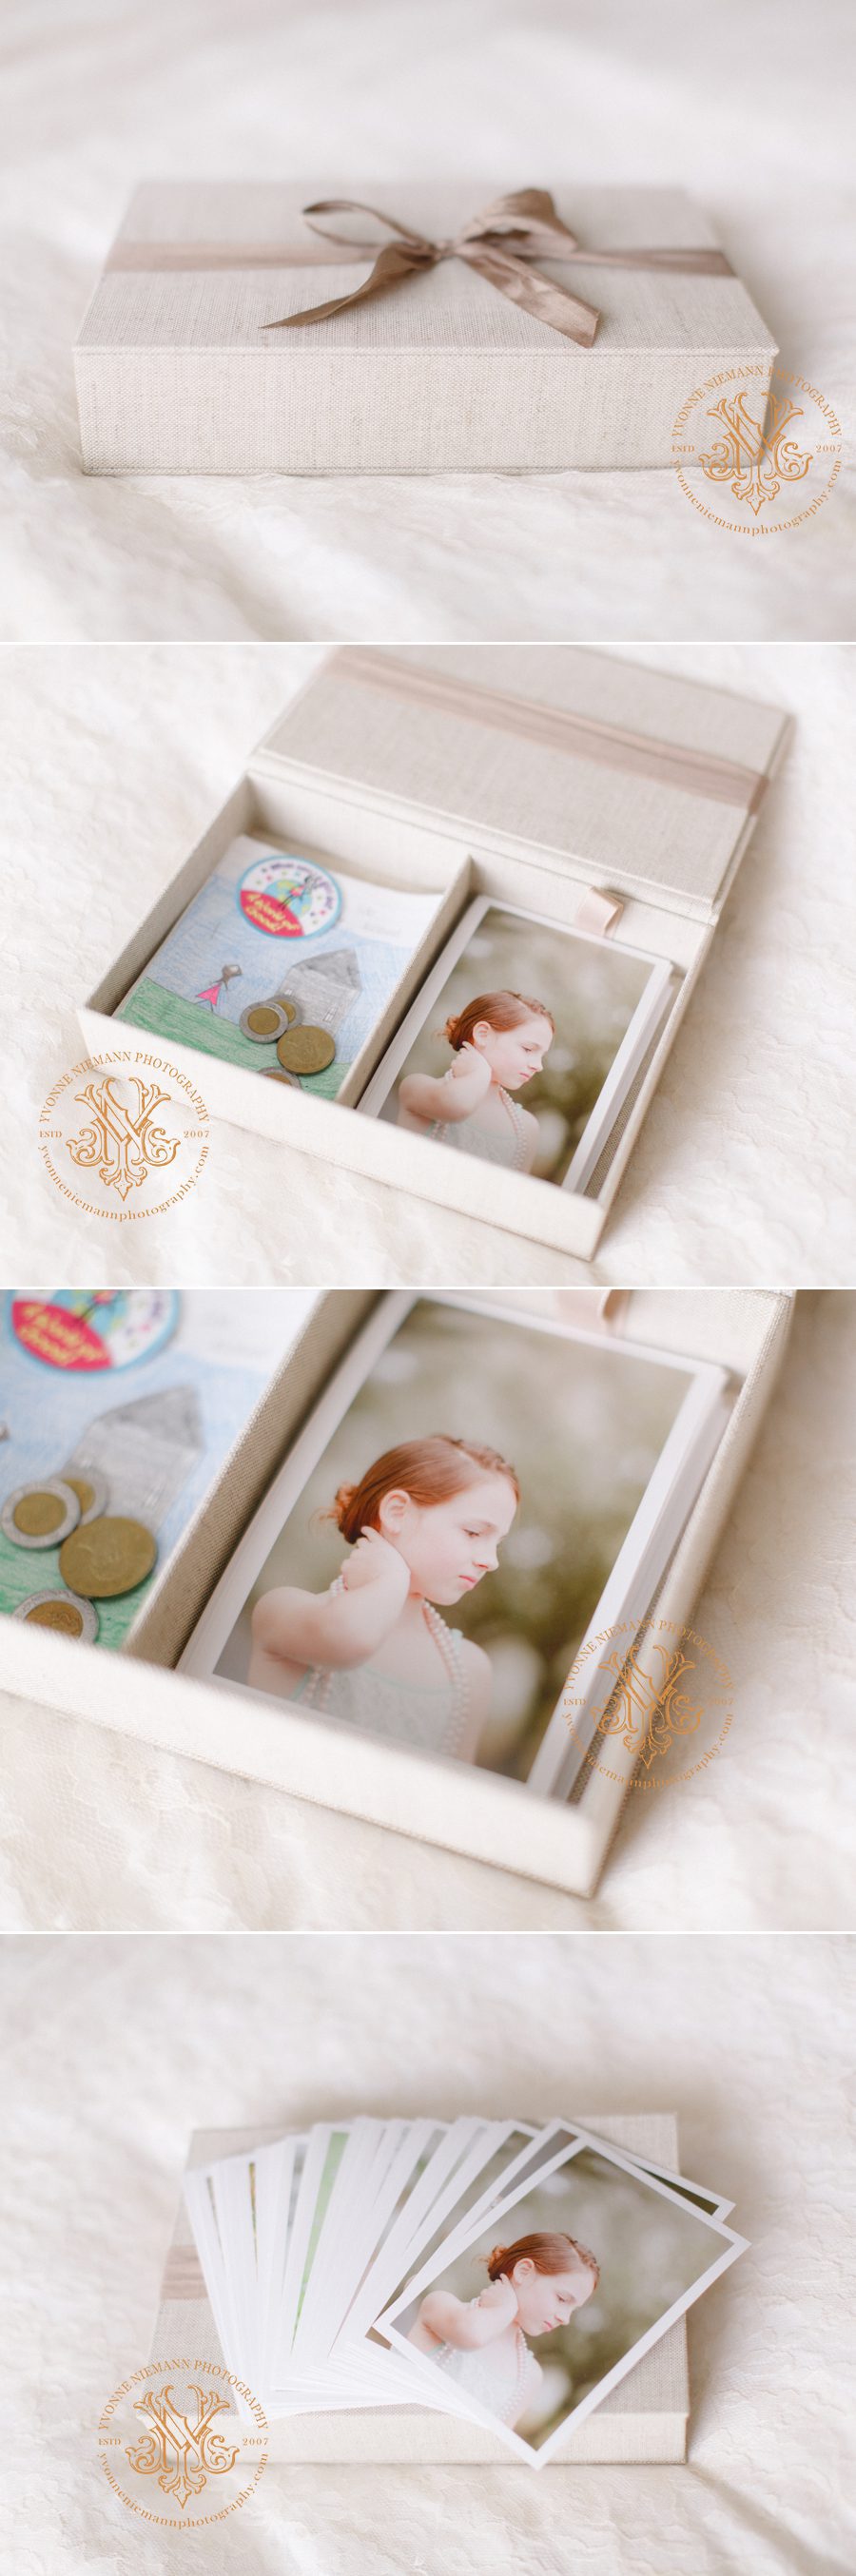 A child's heirloom image box containing portraits and keepsakes of 2nd grade.